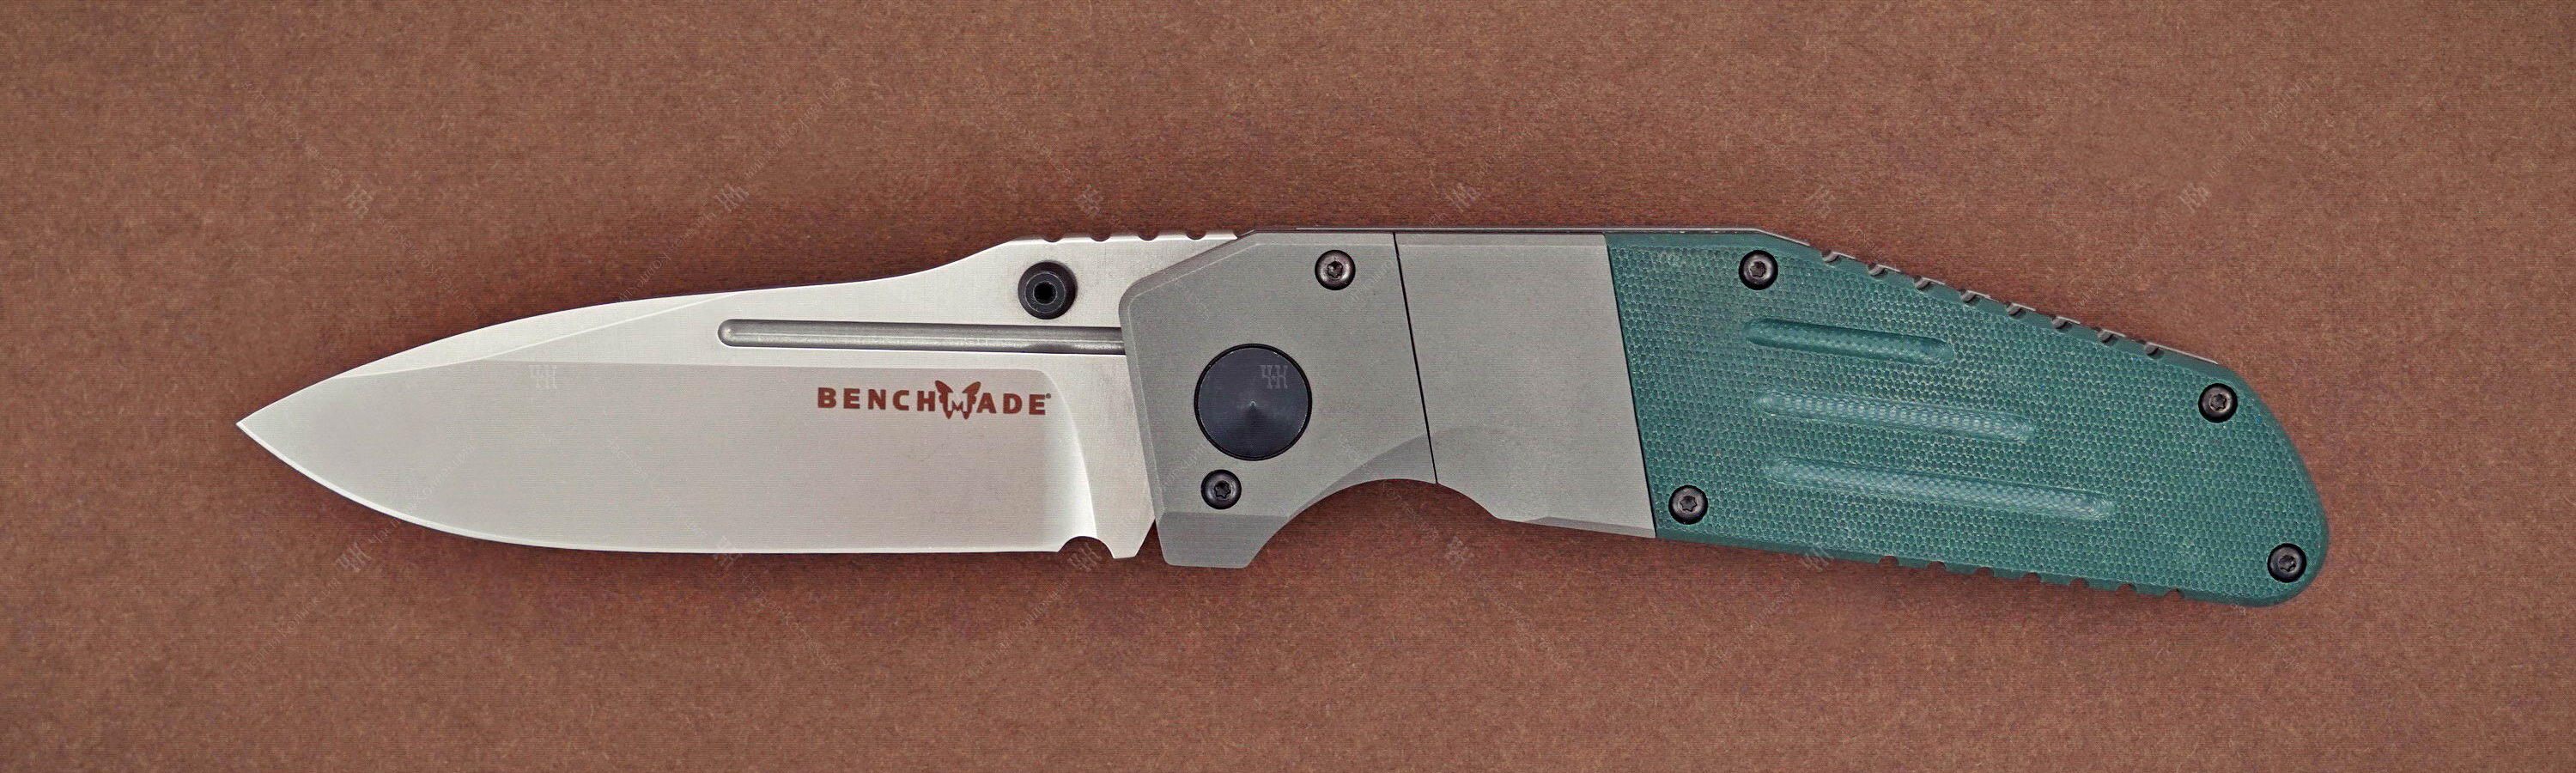 Benchmade 7505-132 Gold class